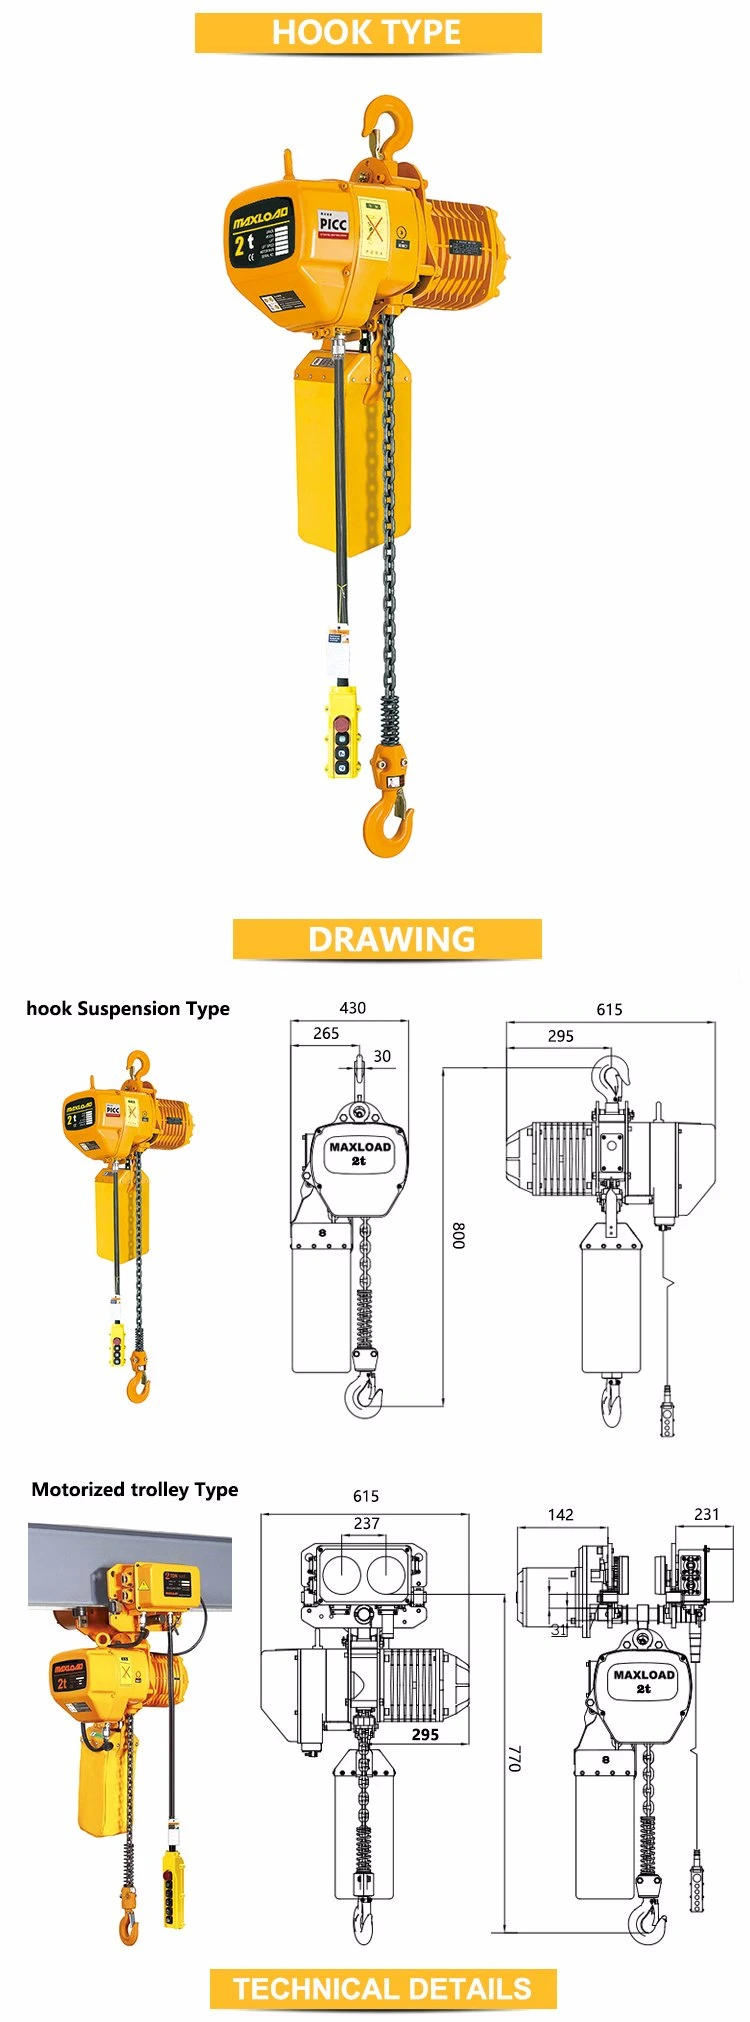 Fixed Model 2t Electric Chain Hoist for Sale